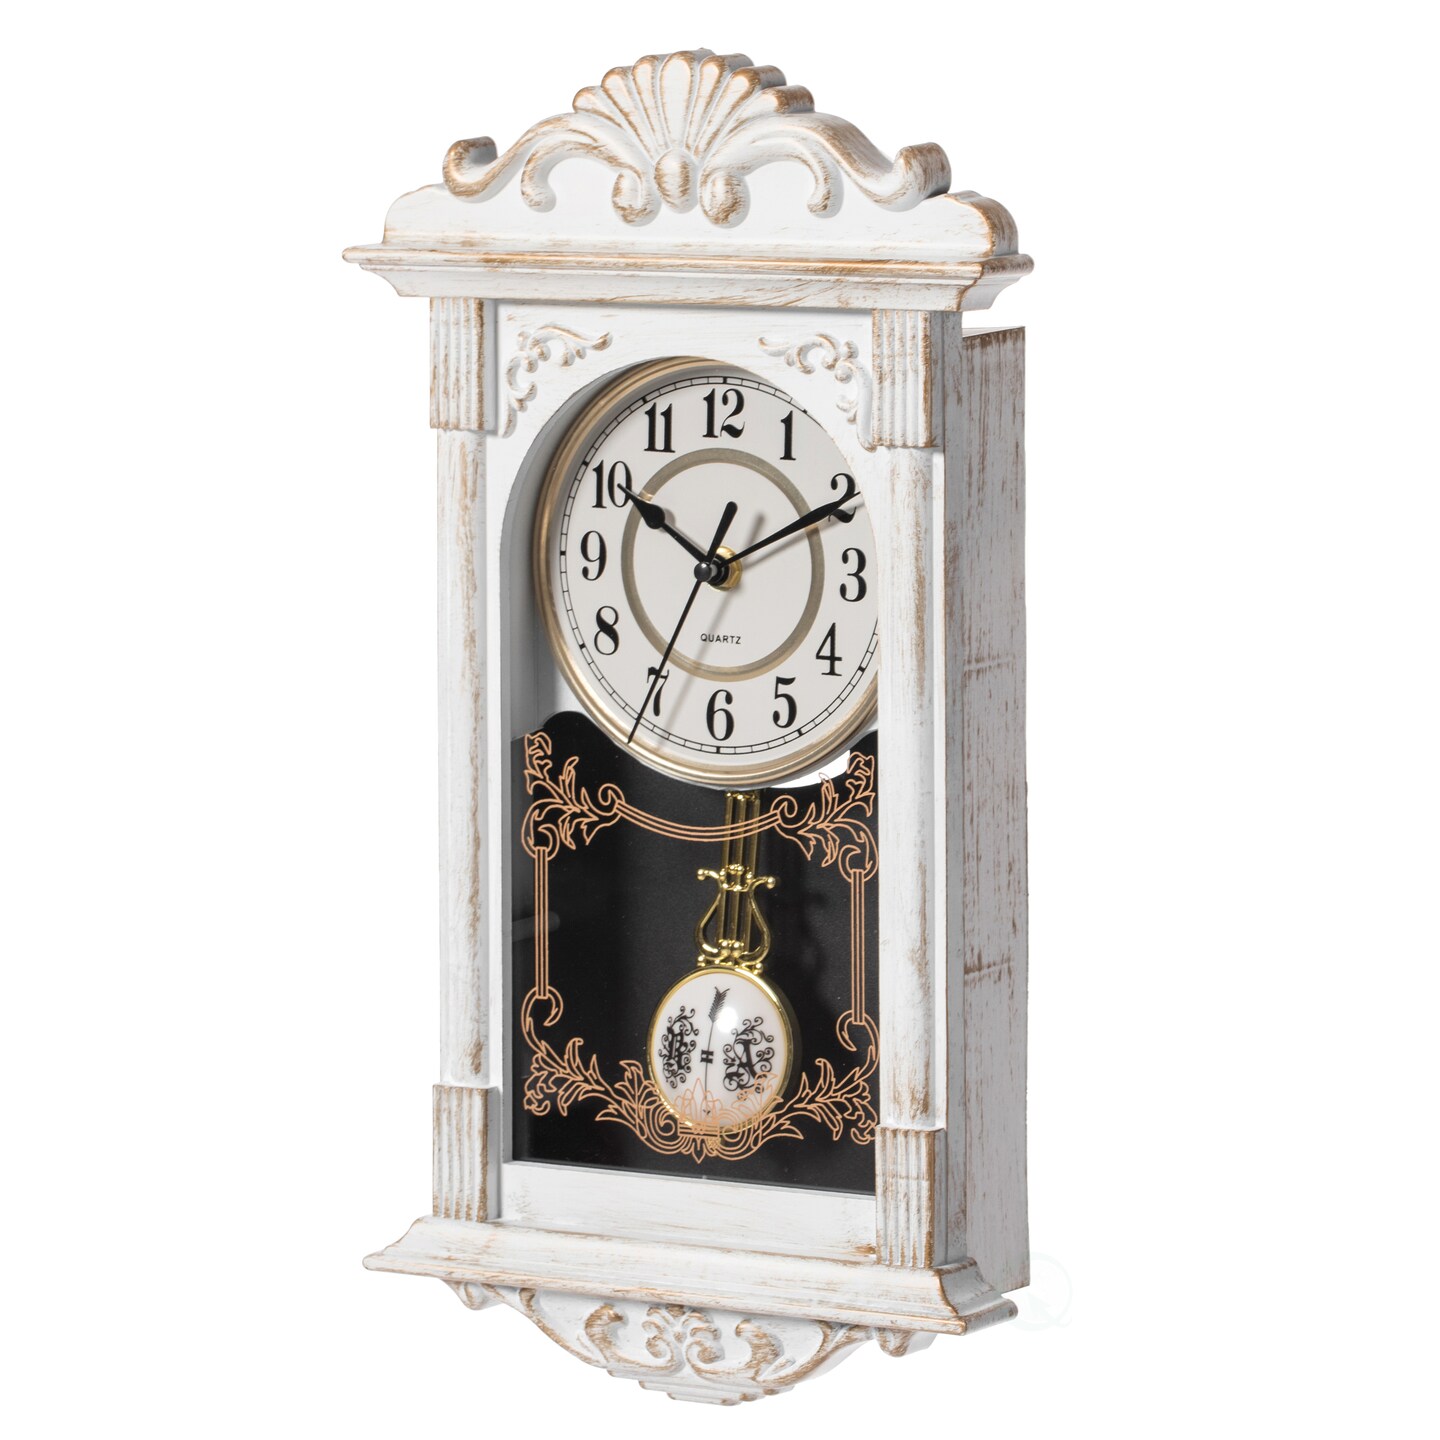 Clockswise Vintage Grandfather Wood-Looking Plastic Pendulum Decorative Battery Operated Wall Clock Brown, for Office, Home Decor, Living Room, Kitchen, or Dining Room